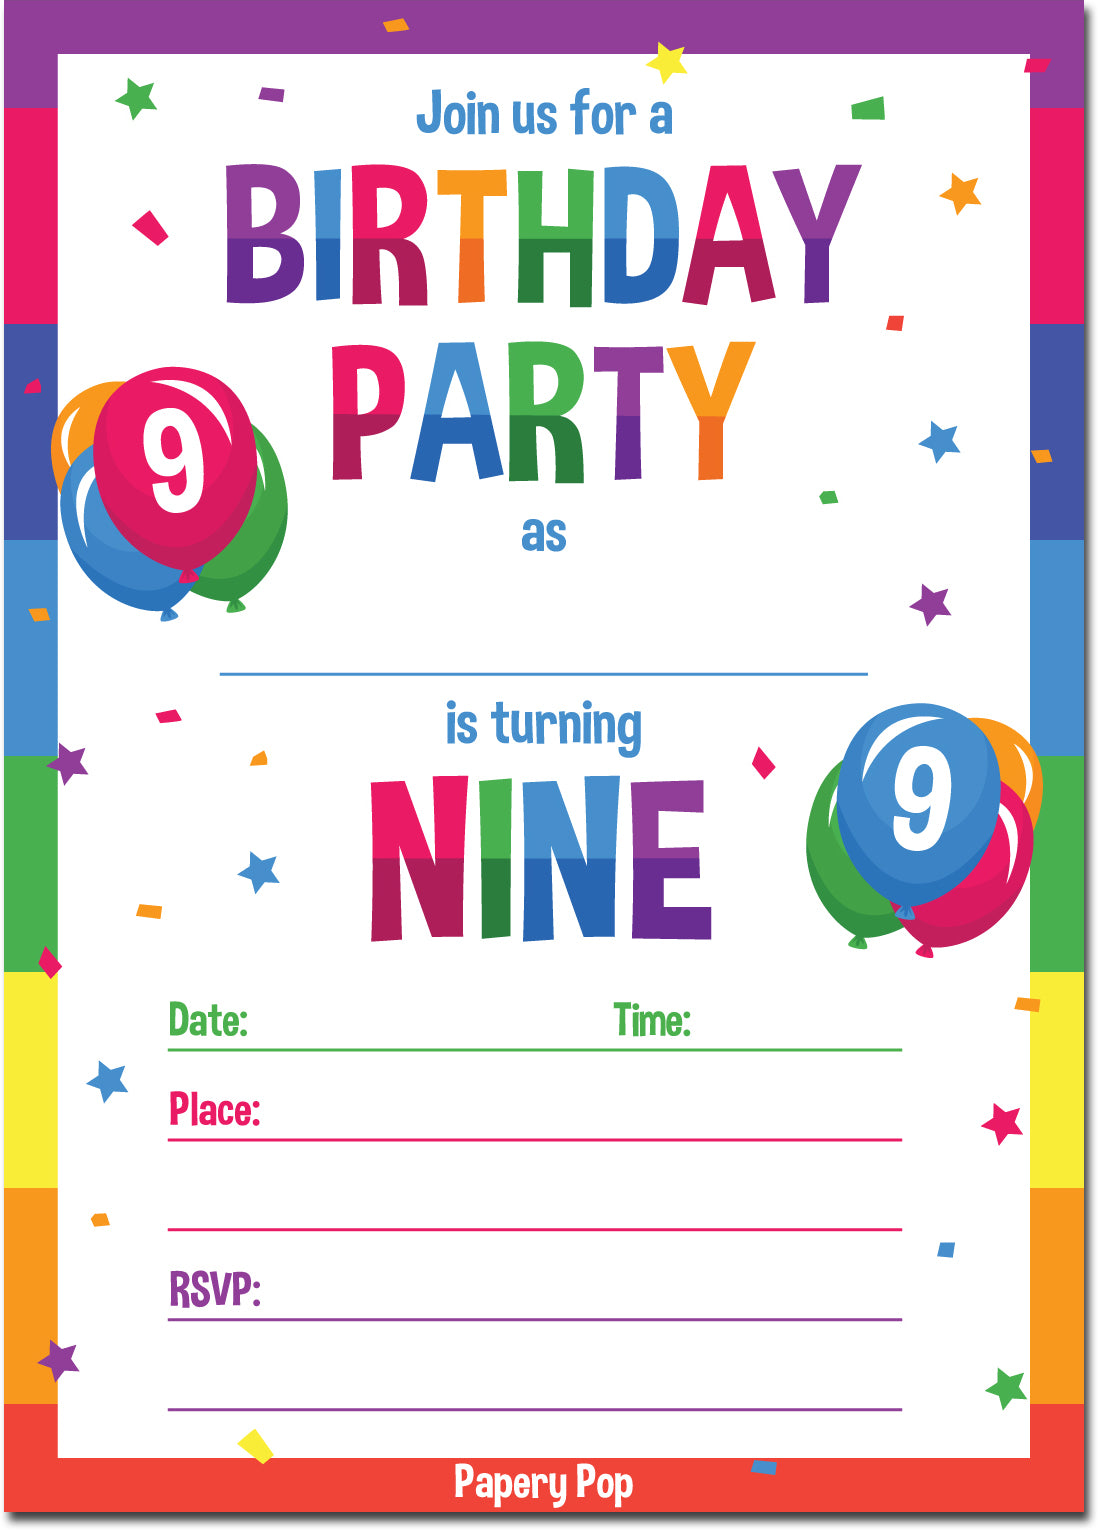 9-year-old-girl-birthday-party-invitations